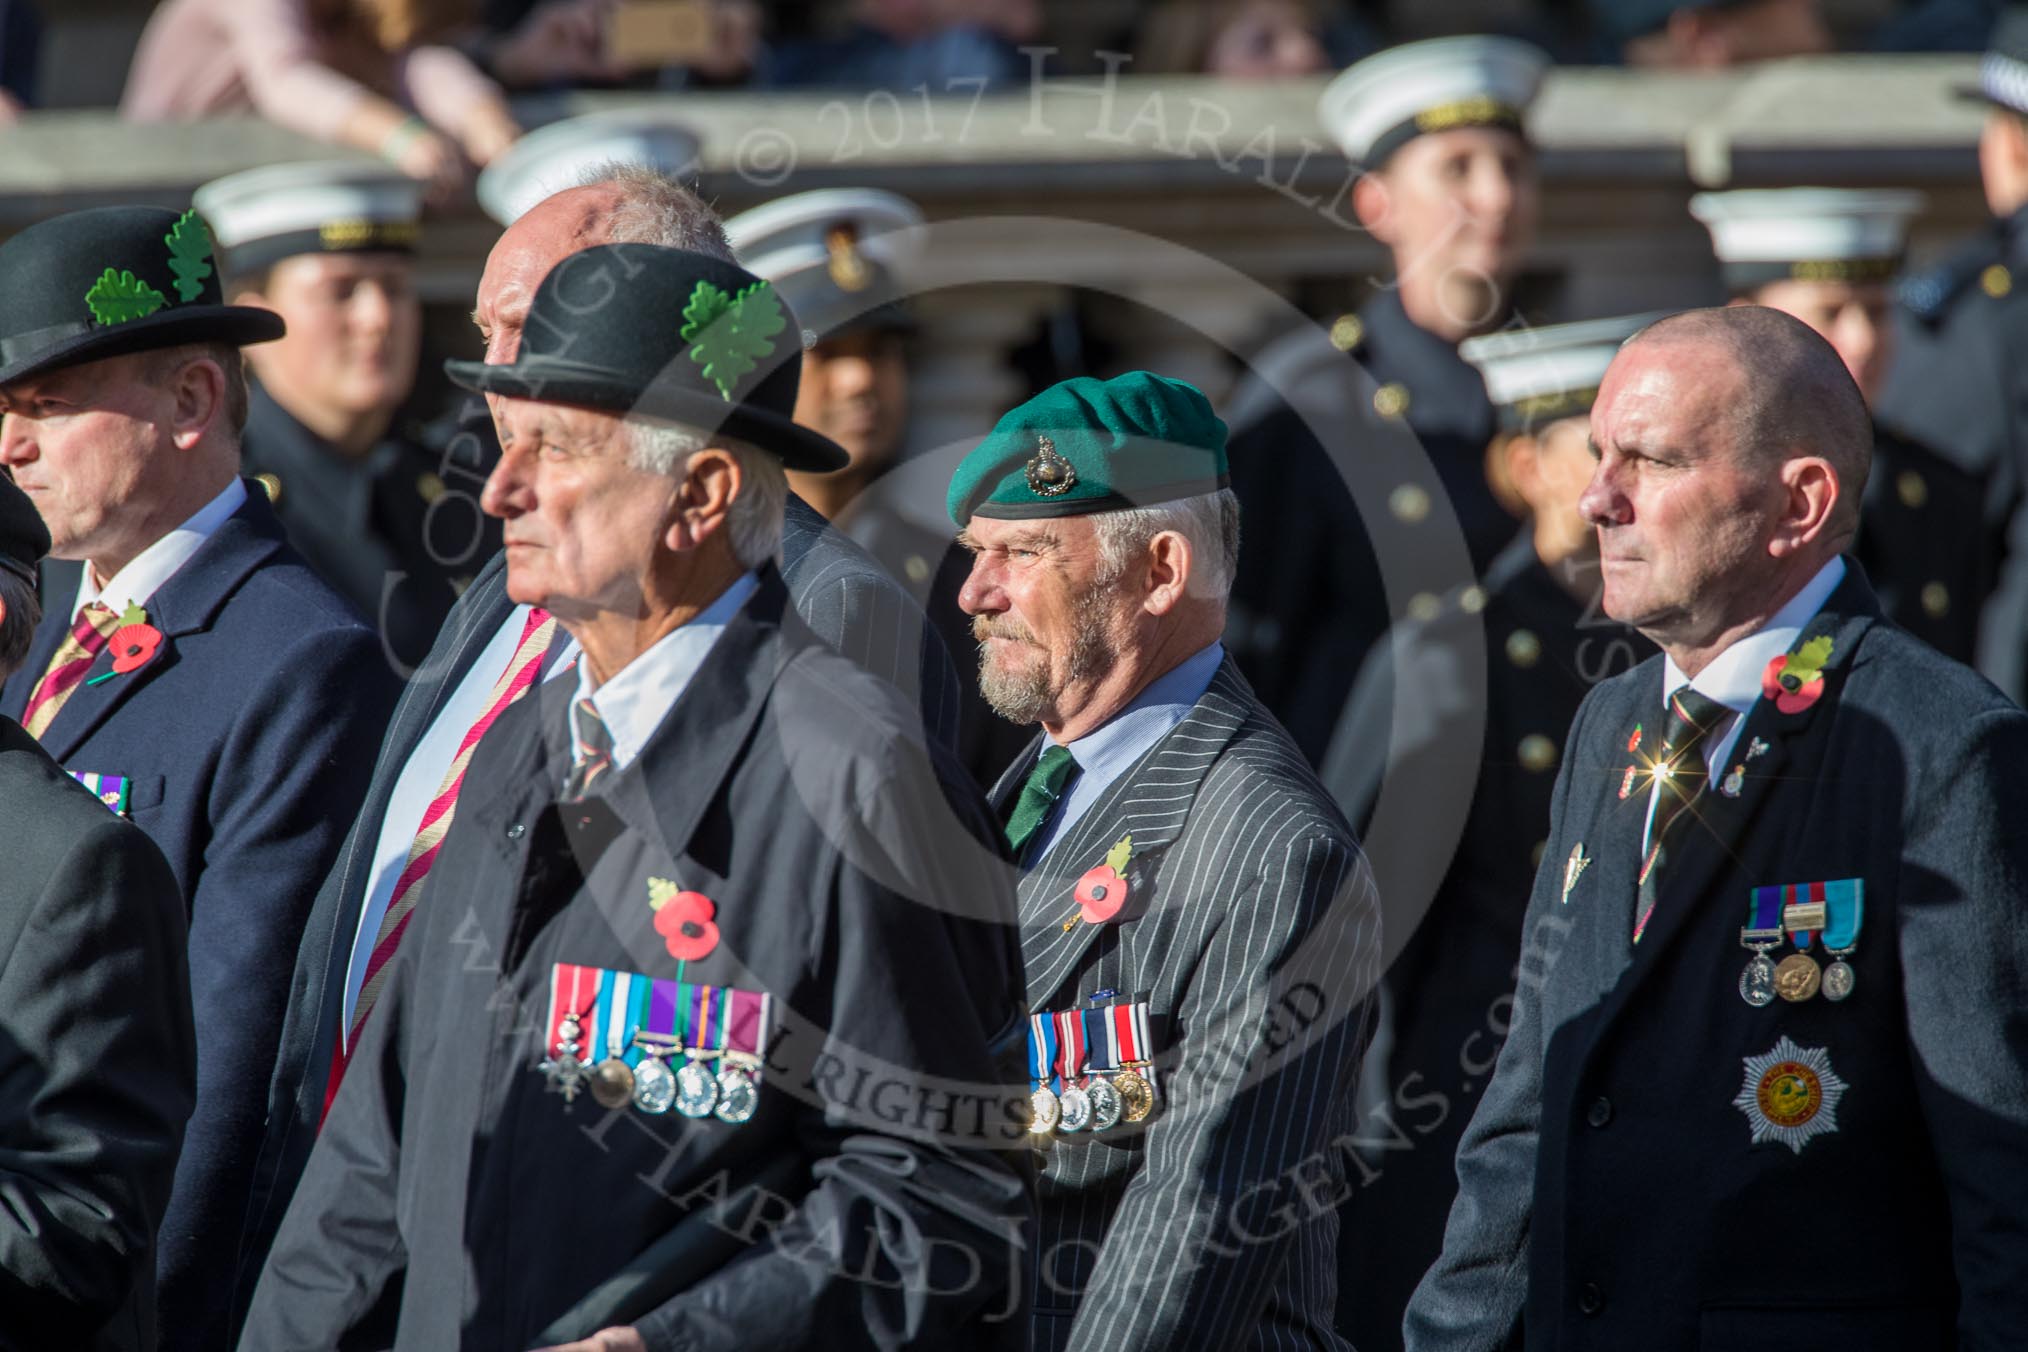 Cheshire Regiment Association (Group A30, 24 members) during the Royal British Legion March Past on Remembrance Sunday at the Cenotaph, Whitehall, Westminster, London, 11 November 2018, 12:01.